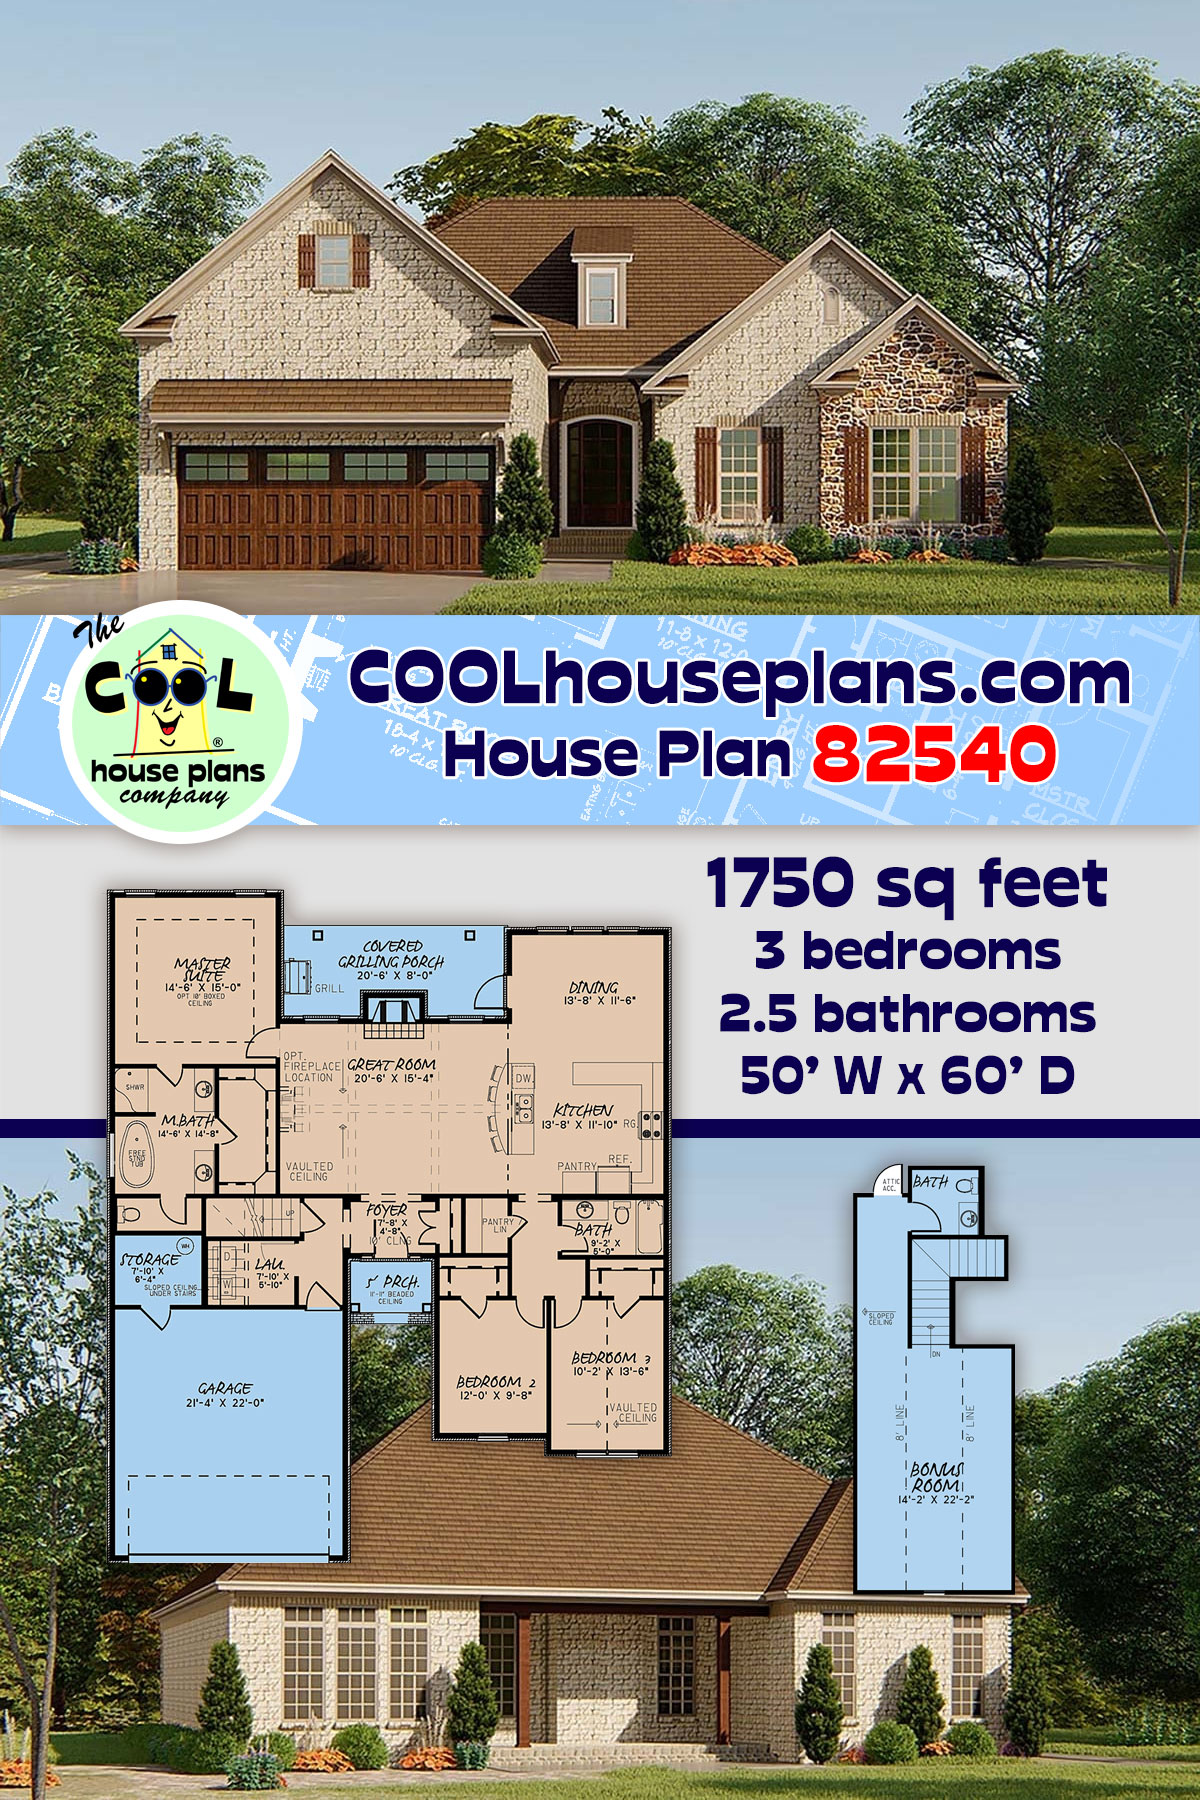 European, French Country, Traditional House Plan 82540 with 3 Beds, 3 Baths, 2 Car Garage